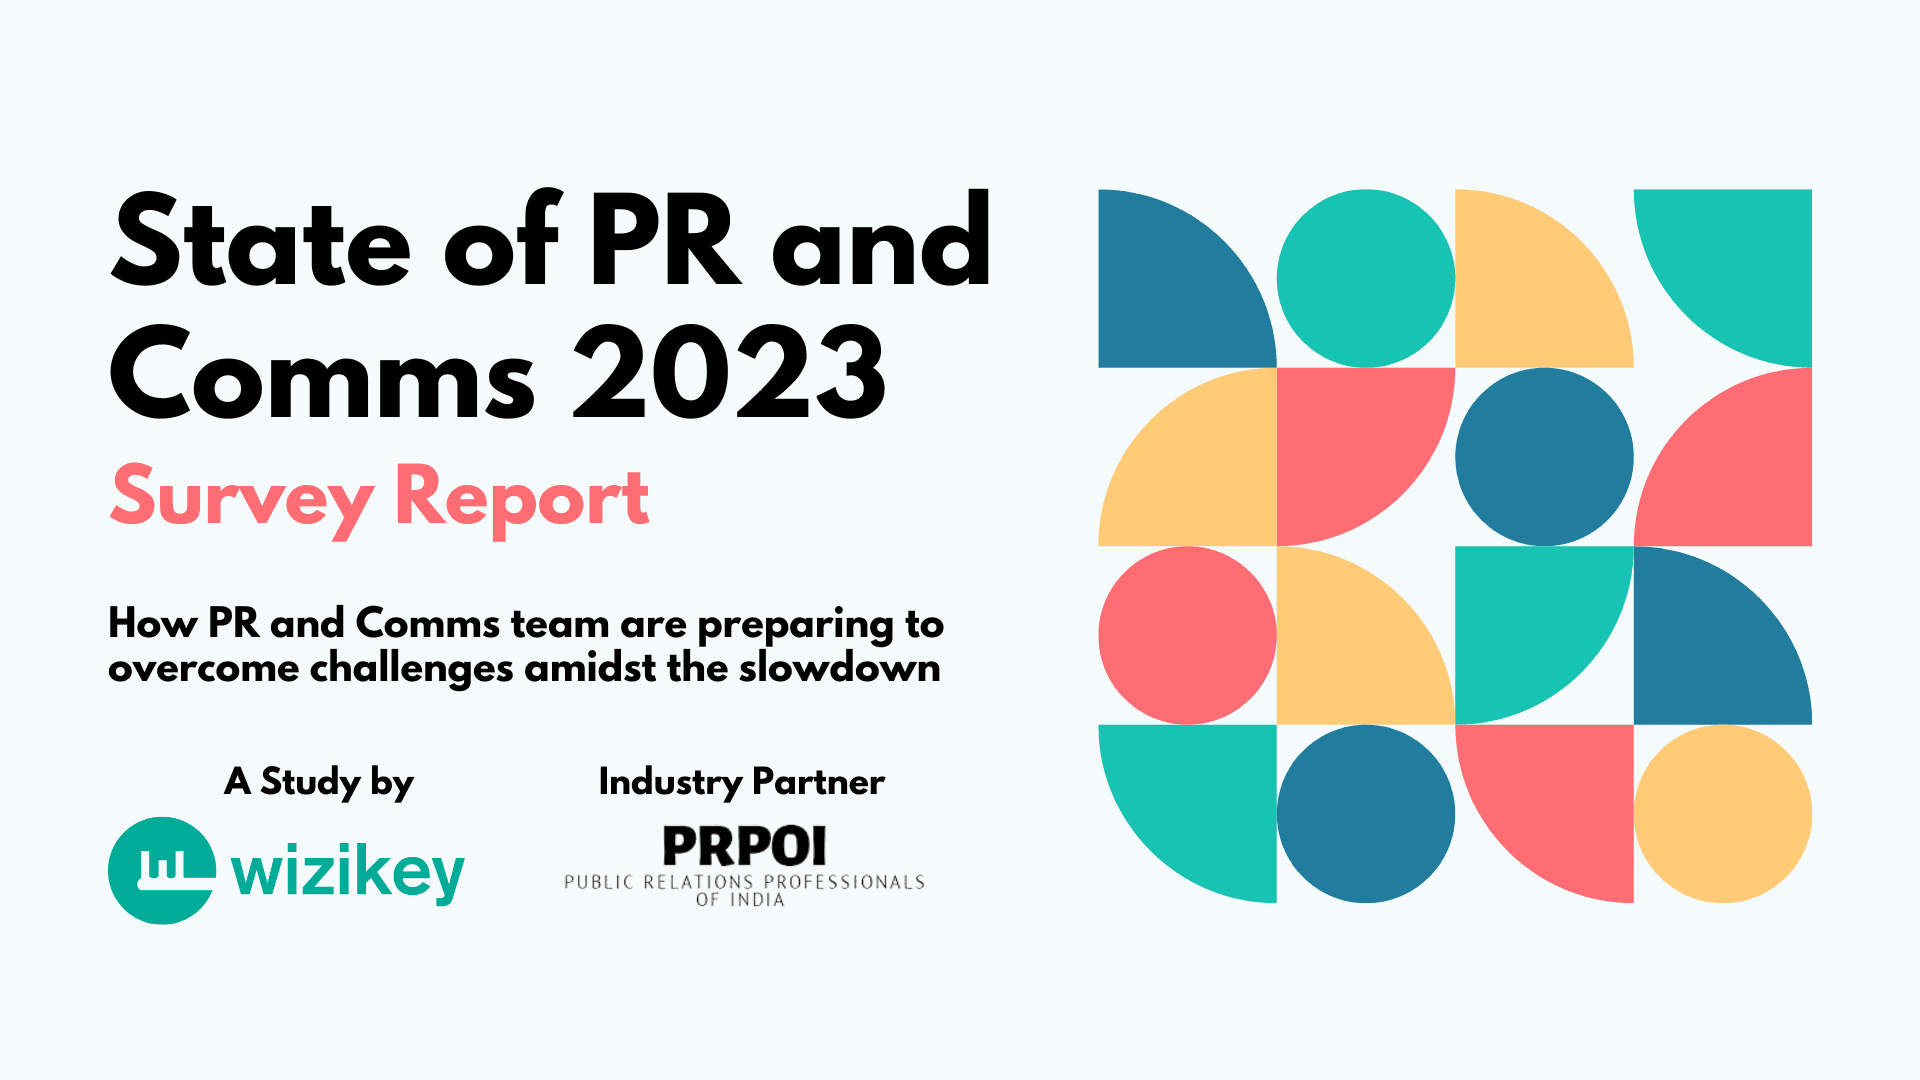 State of PR and Comms 2023